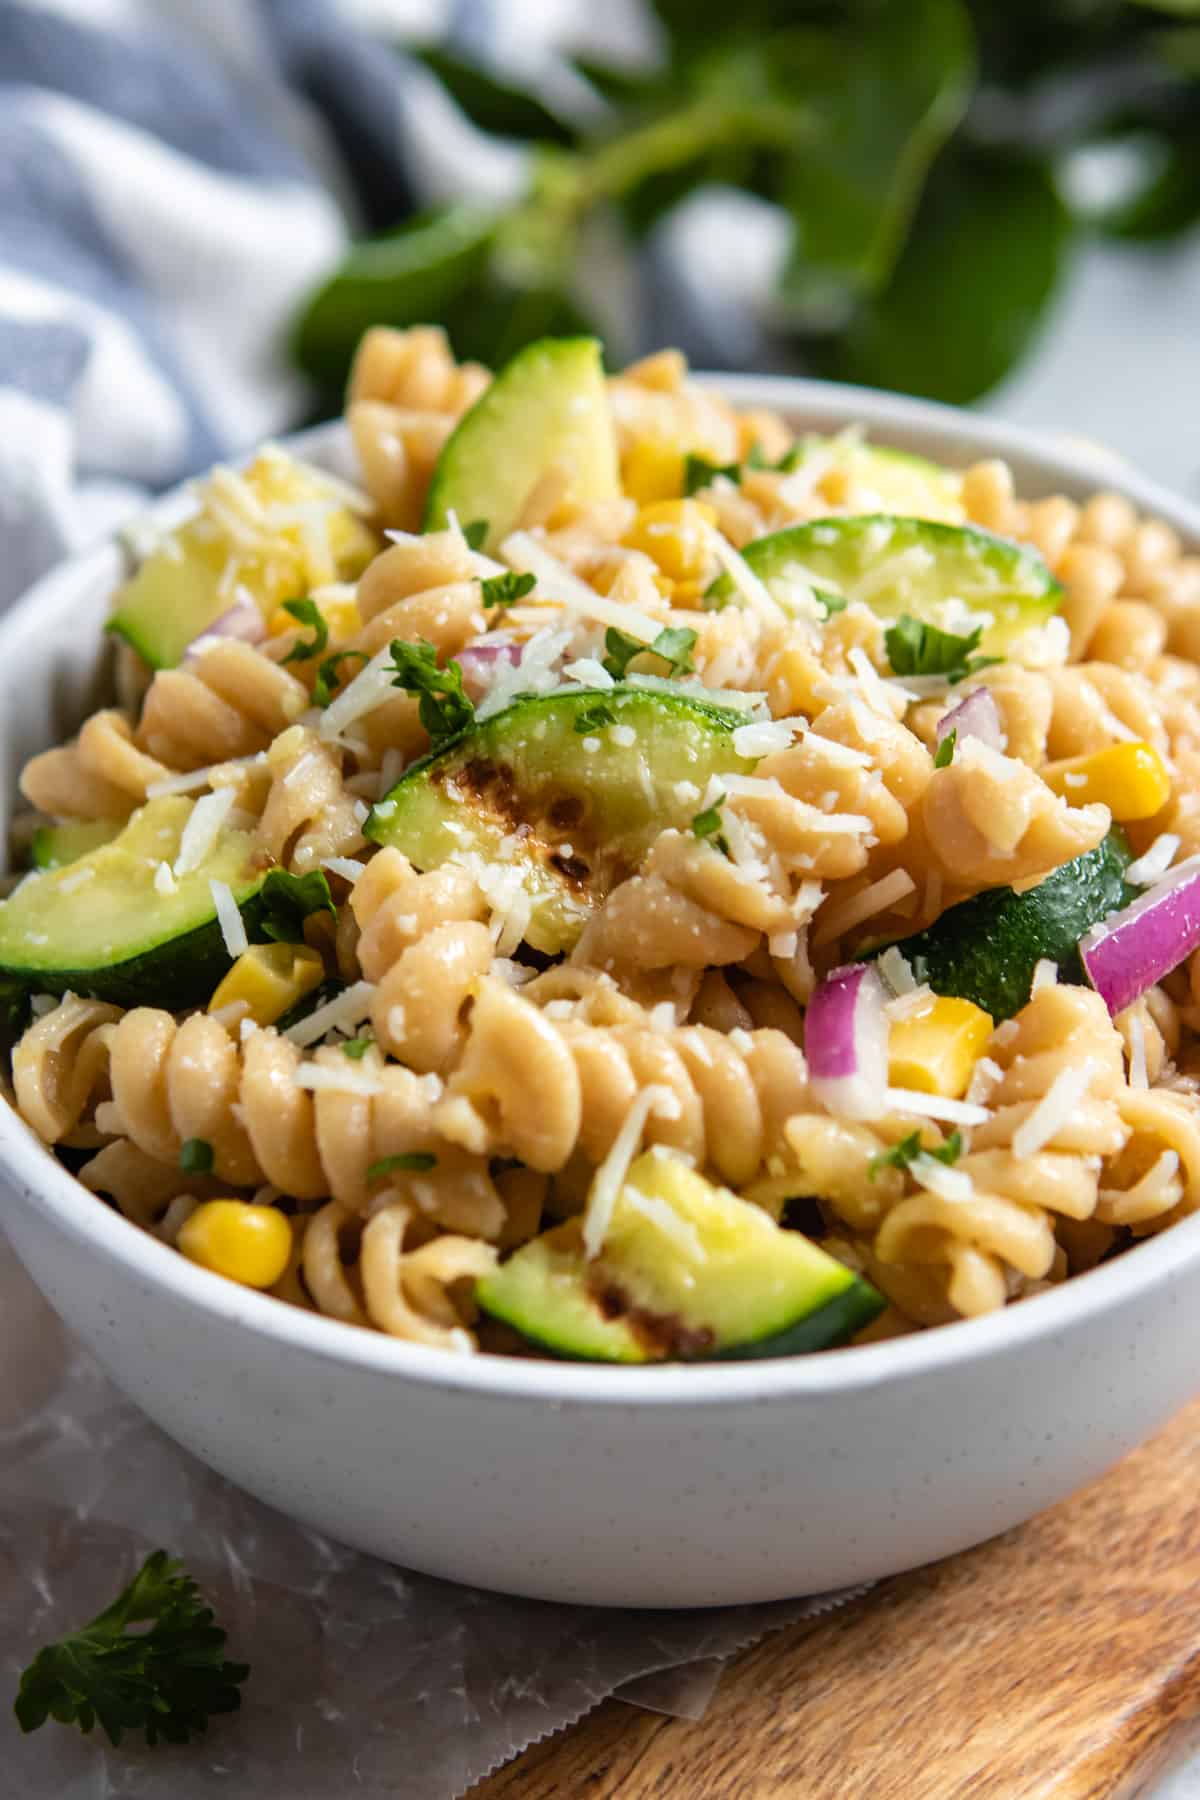 Zucchini pasta salad in bowl with fresh corn and shredded parmesan.